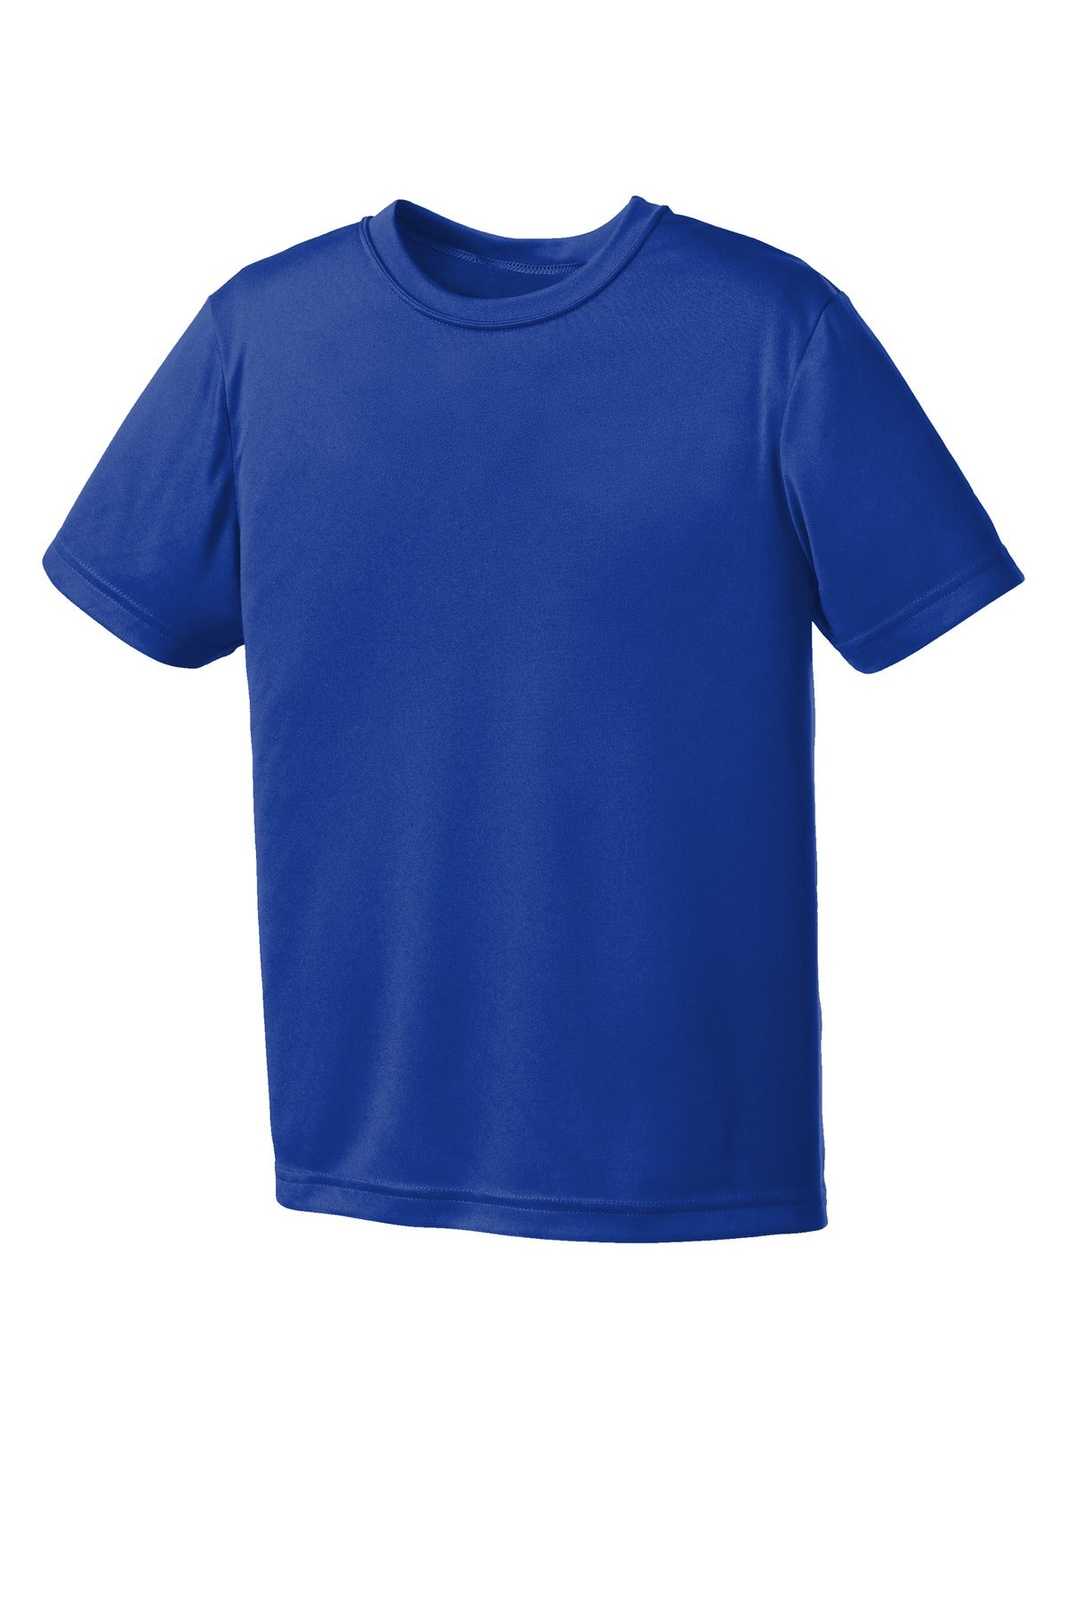 Port & Company PC380Y Youth Performance Tee - True Royal - HIT a Double - 1